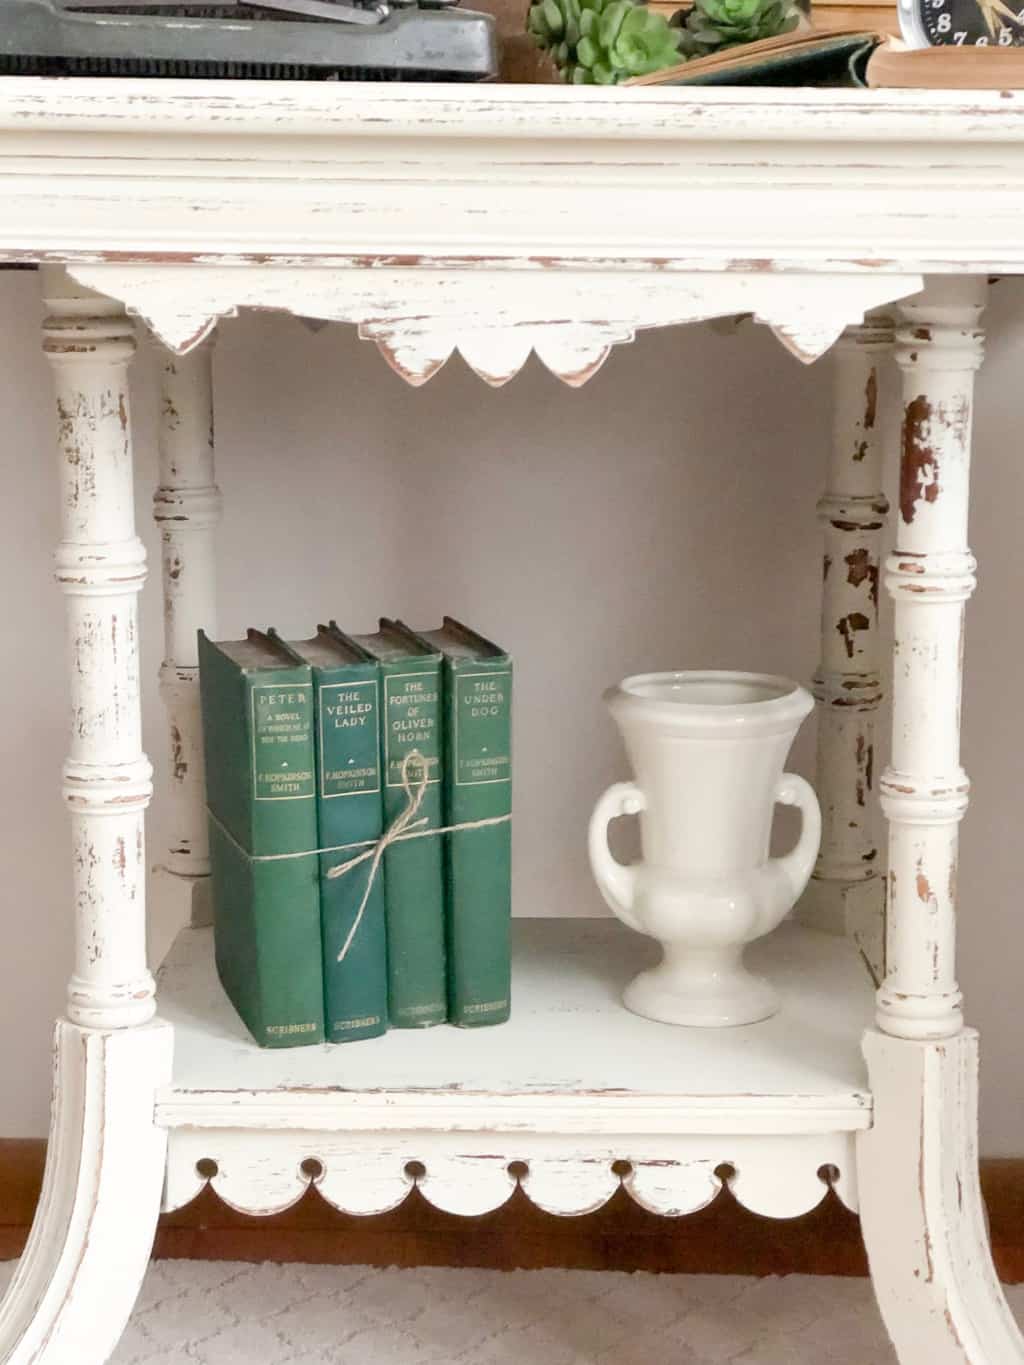 If you are looking for a farmhouse end table, this tutorial will show you how to DIY a farmhouse end table easily and with only a few supplies.